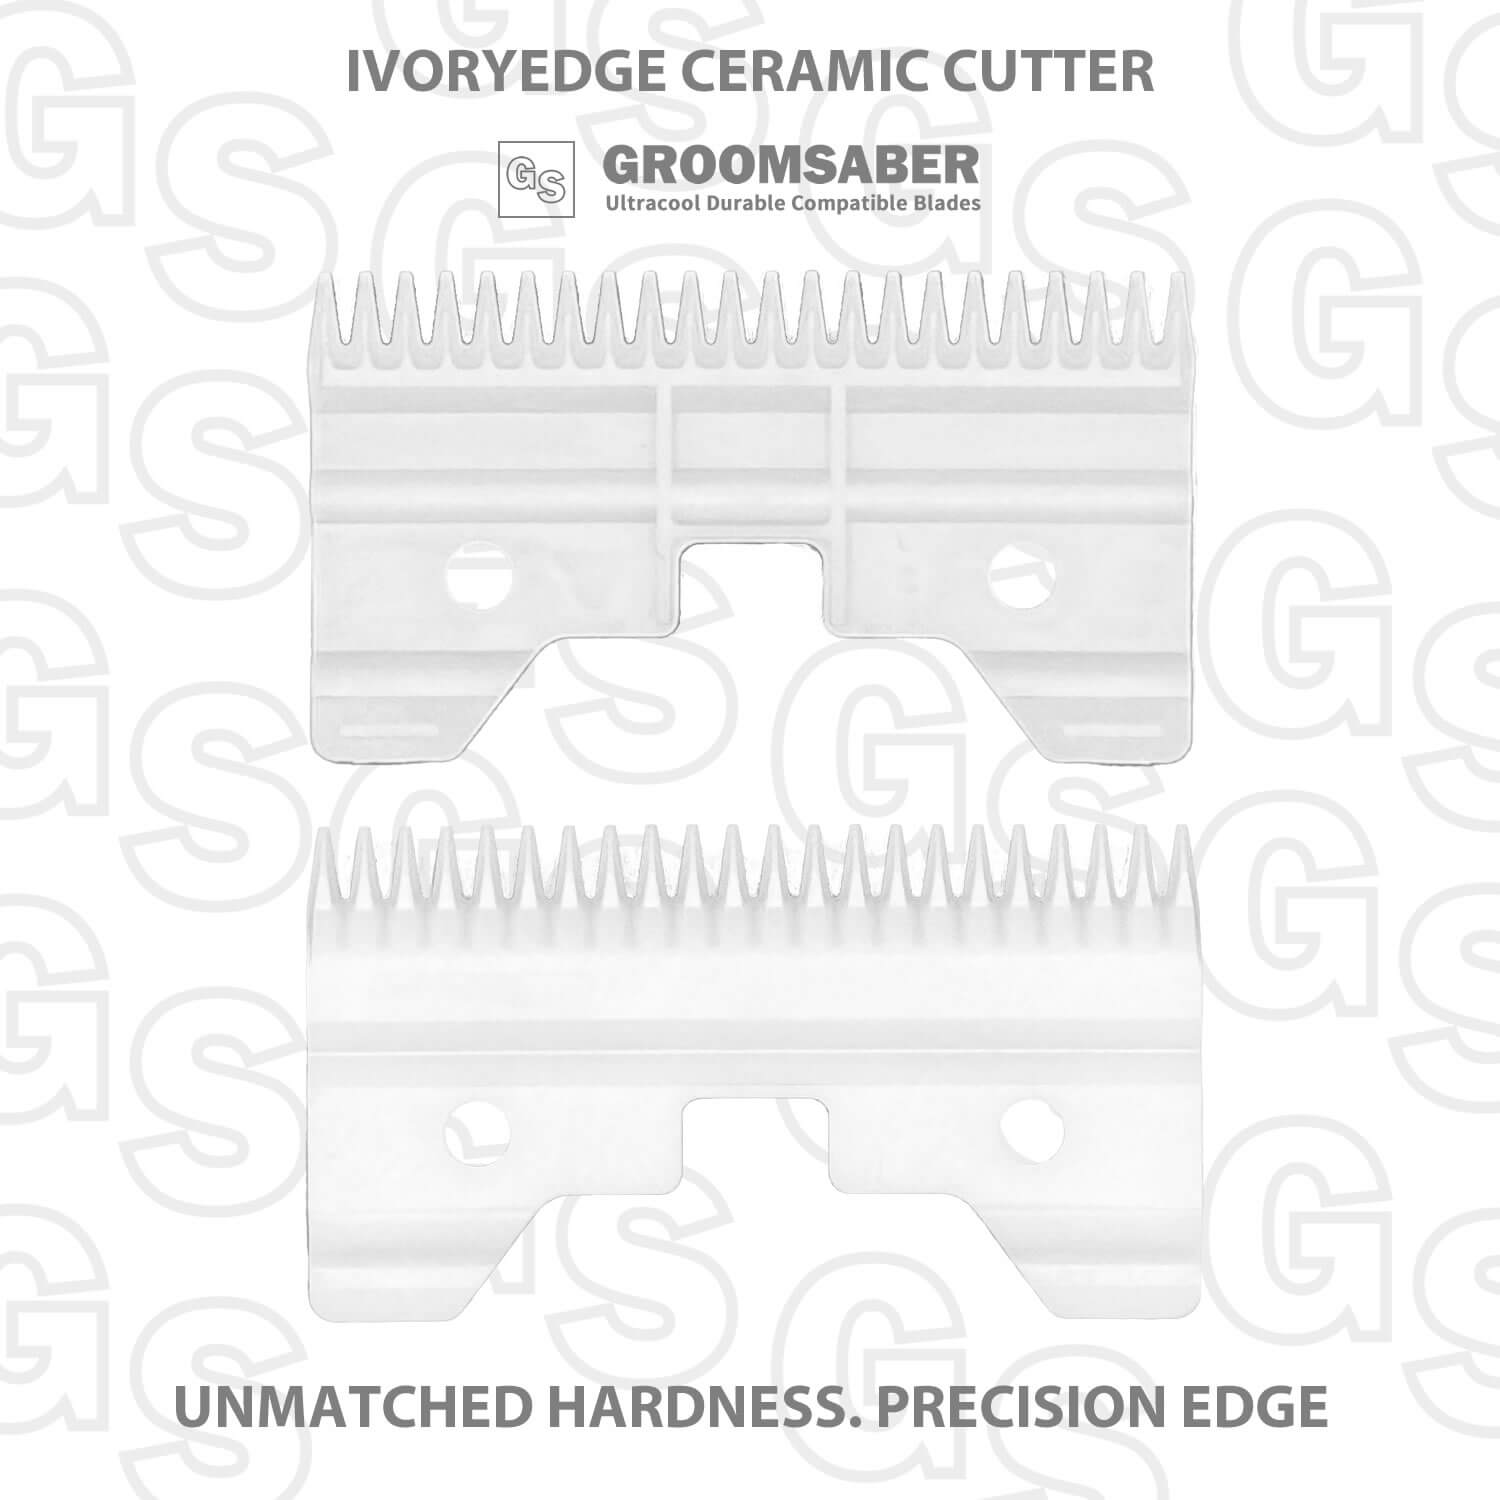 Full Set of Ceramic Clipper Blades with IvoryEdge Cutters